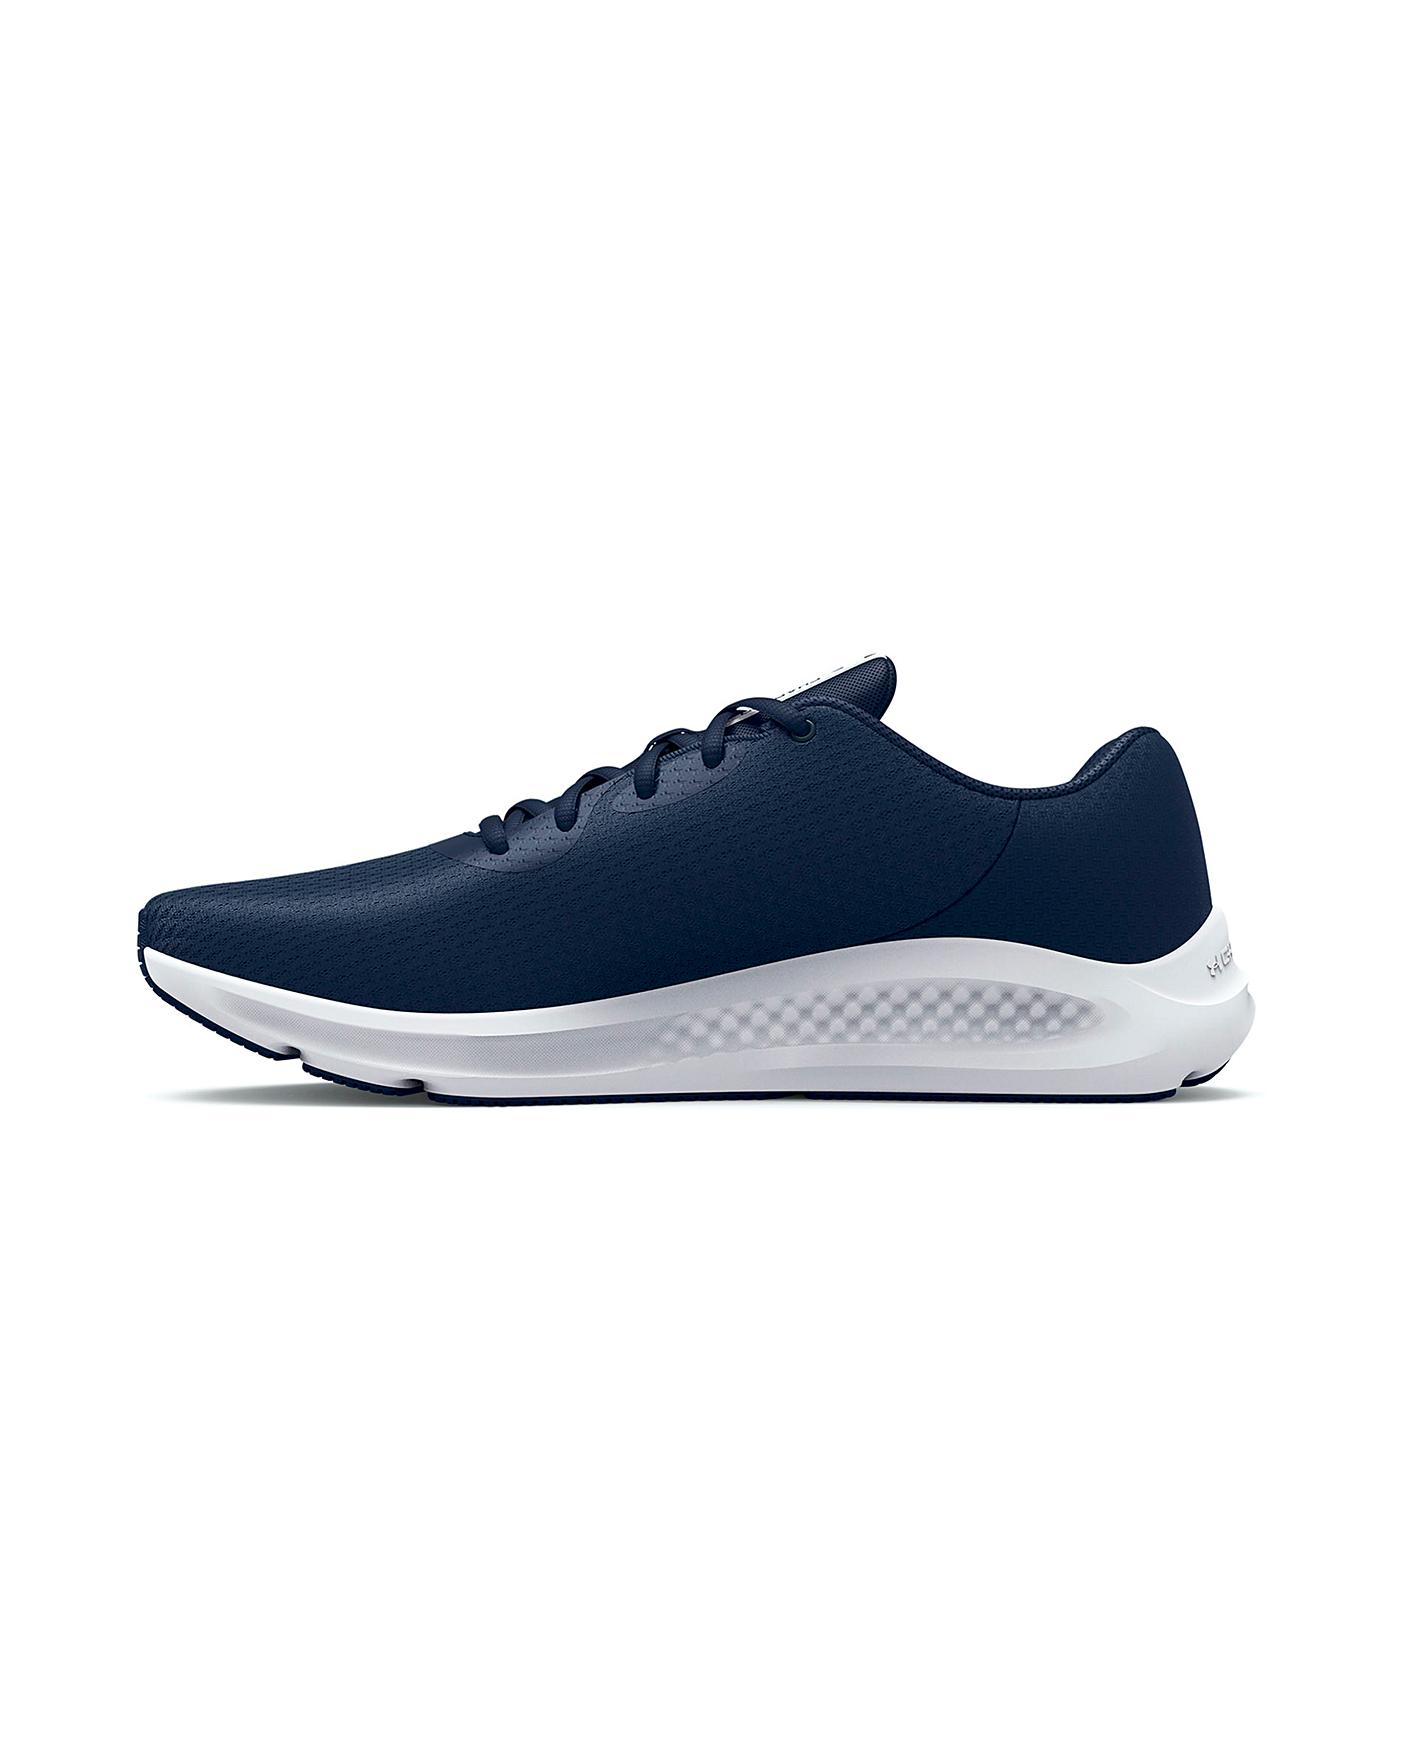 Under Armour Charged Pursuit 3 Trainers | Ambrose Wilson